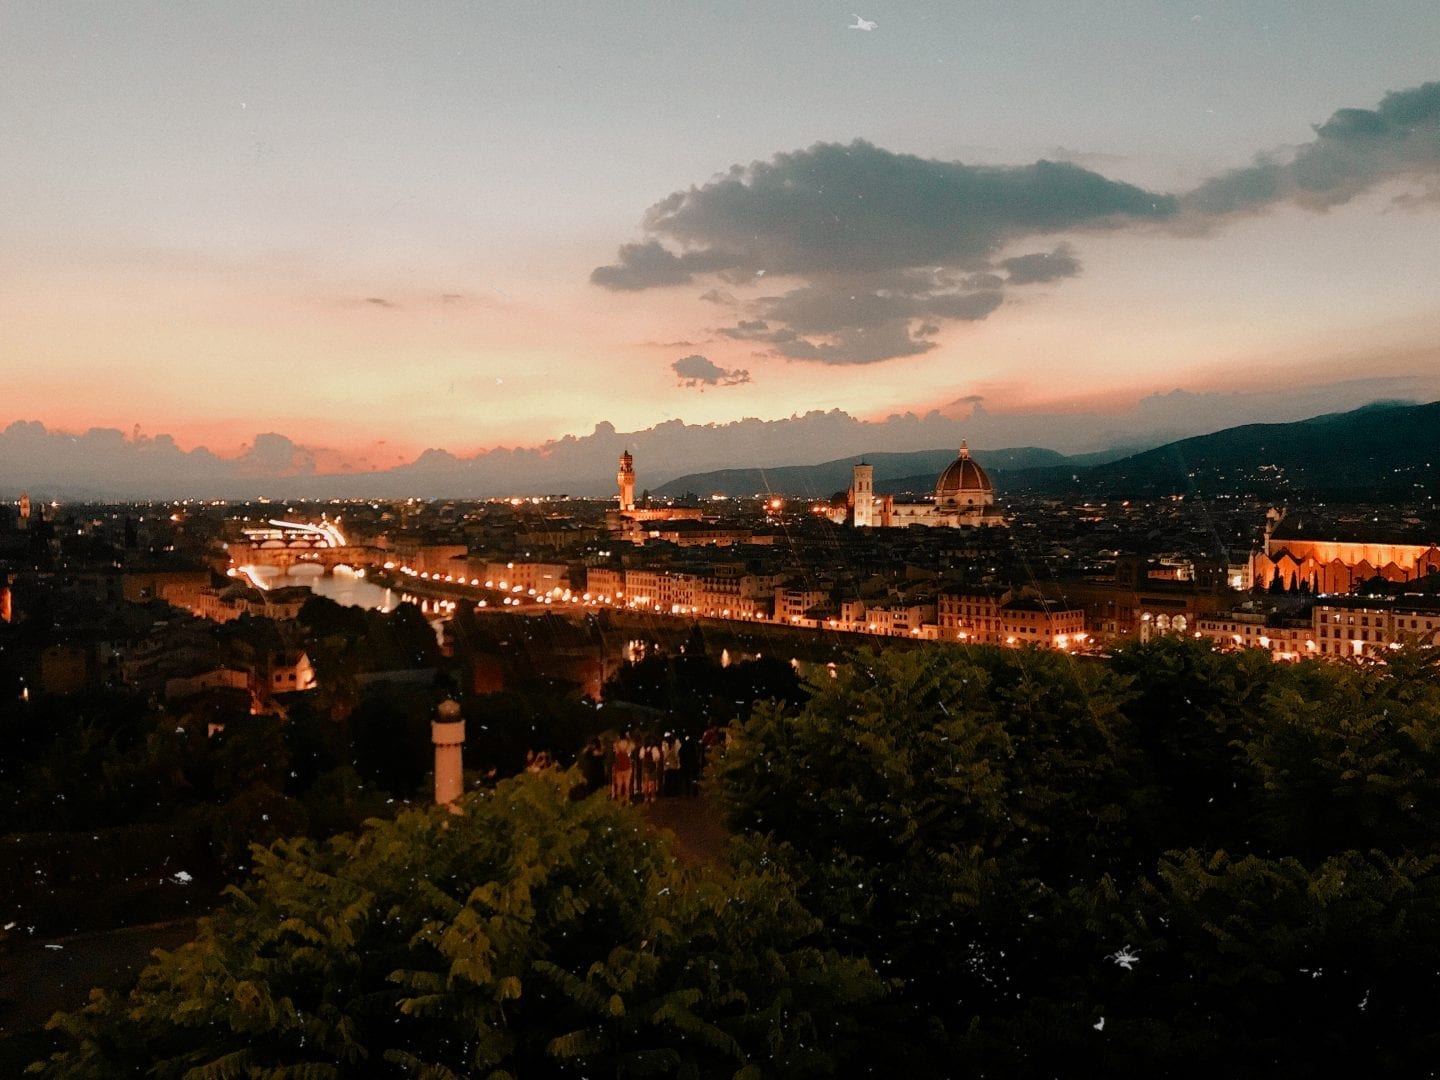 Nighttime view over European city with historic buildings and river. Where to stay in Florence, Italy: San Niccolò neighborhood